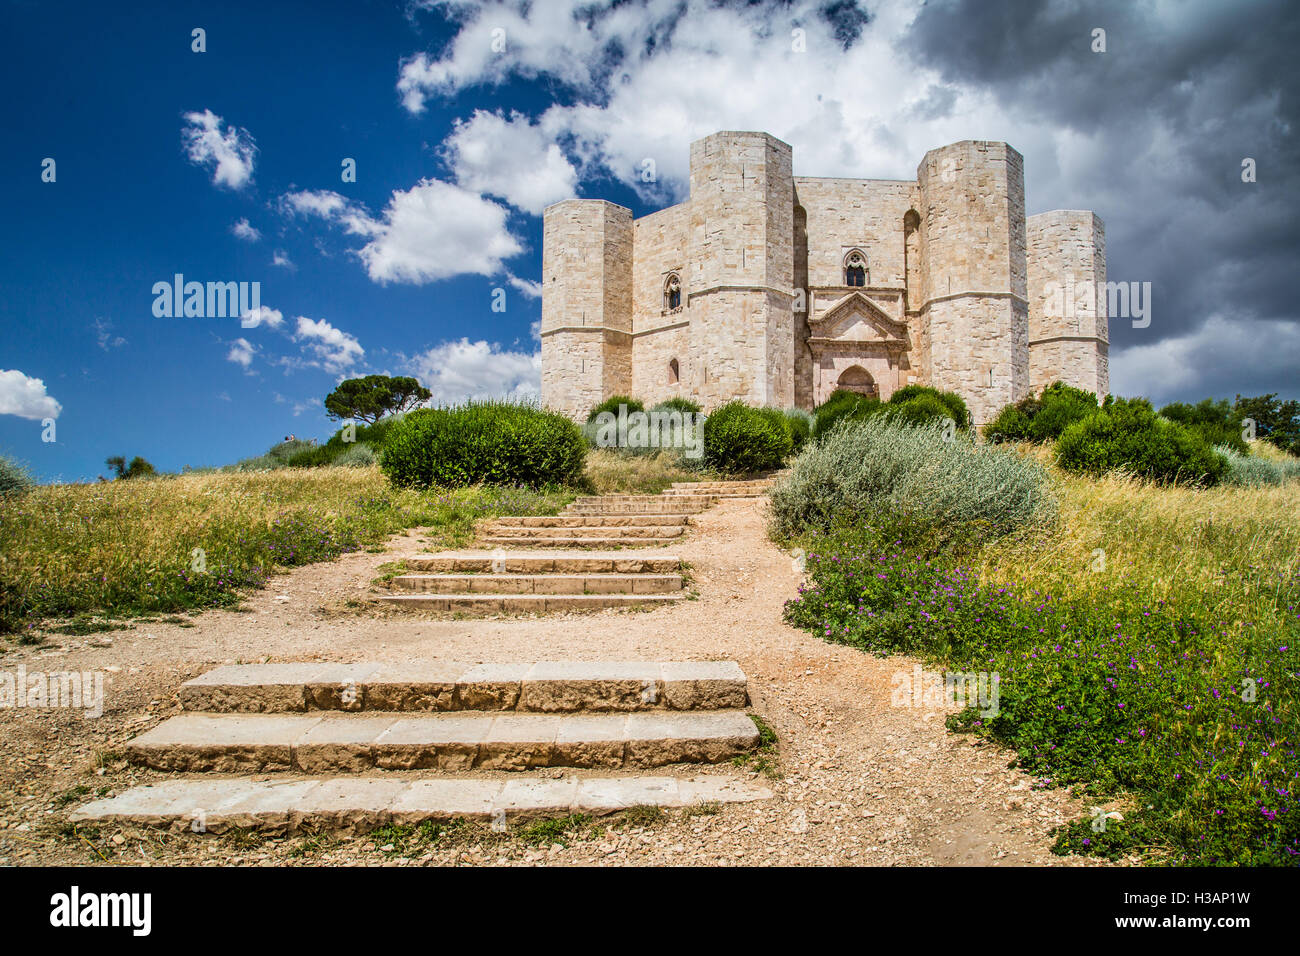 Beautiful view of Castel del Monte, the famous castle built in an octagonal shape by the Holy Roman Emperor Frederick II, Apulia region, Italy Stock Photo